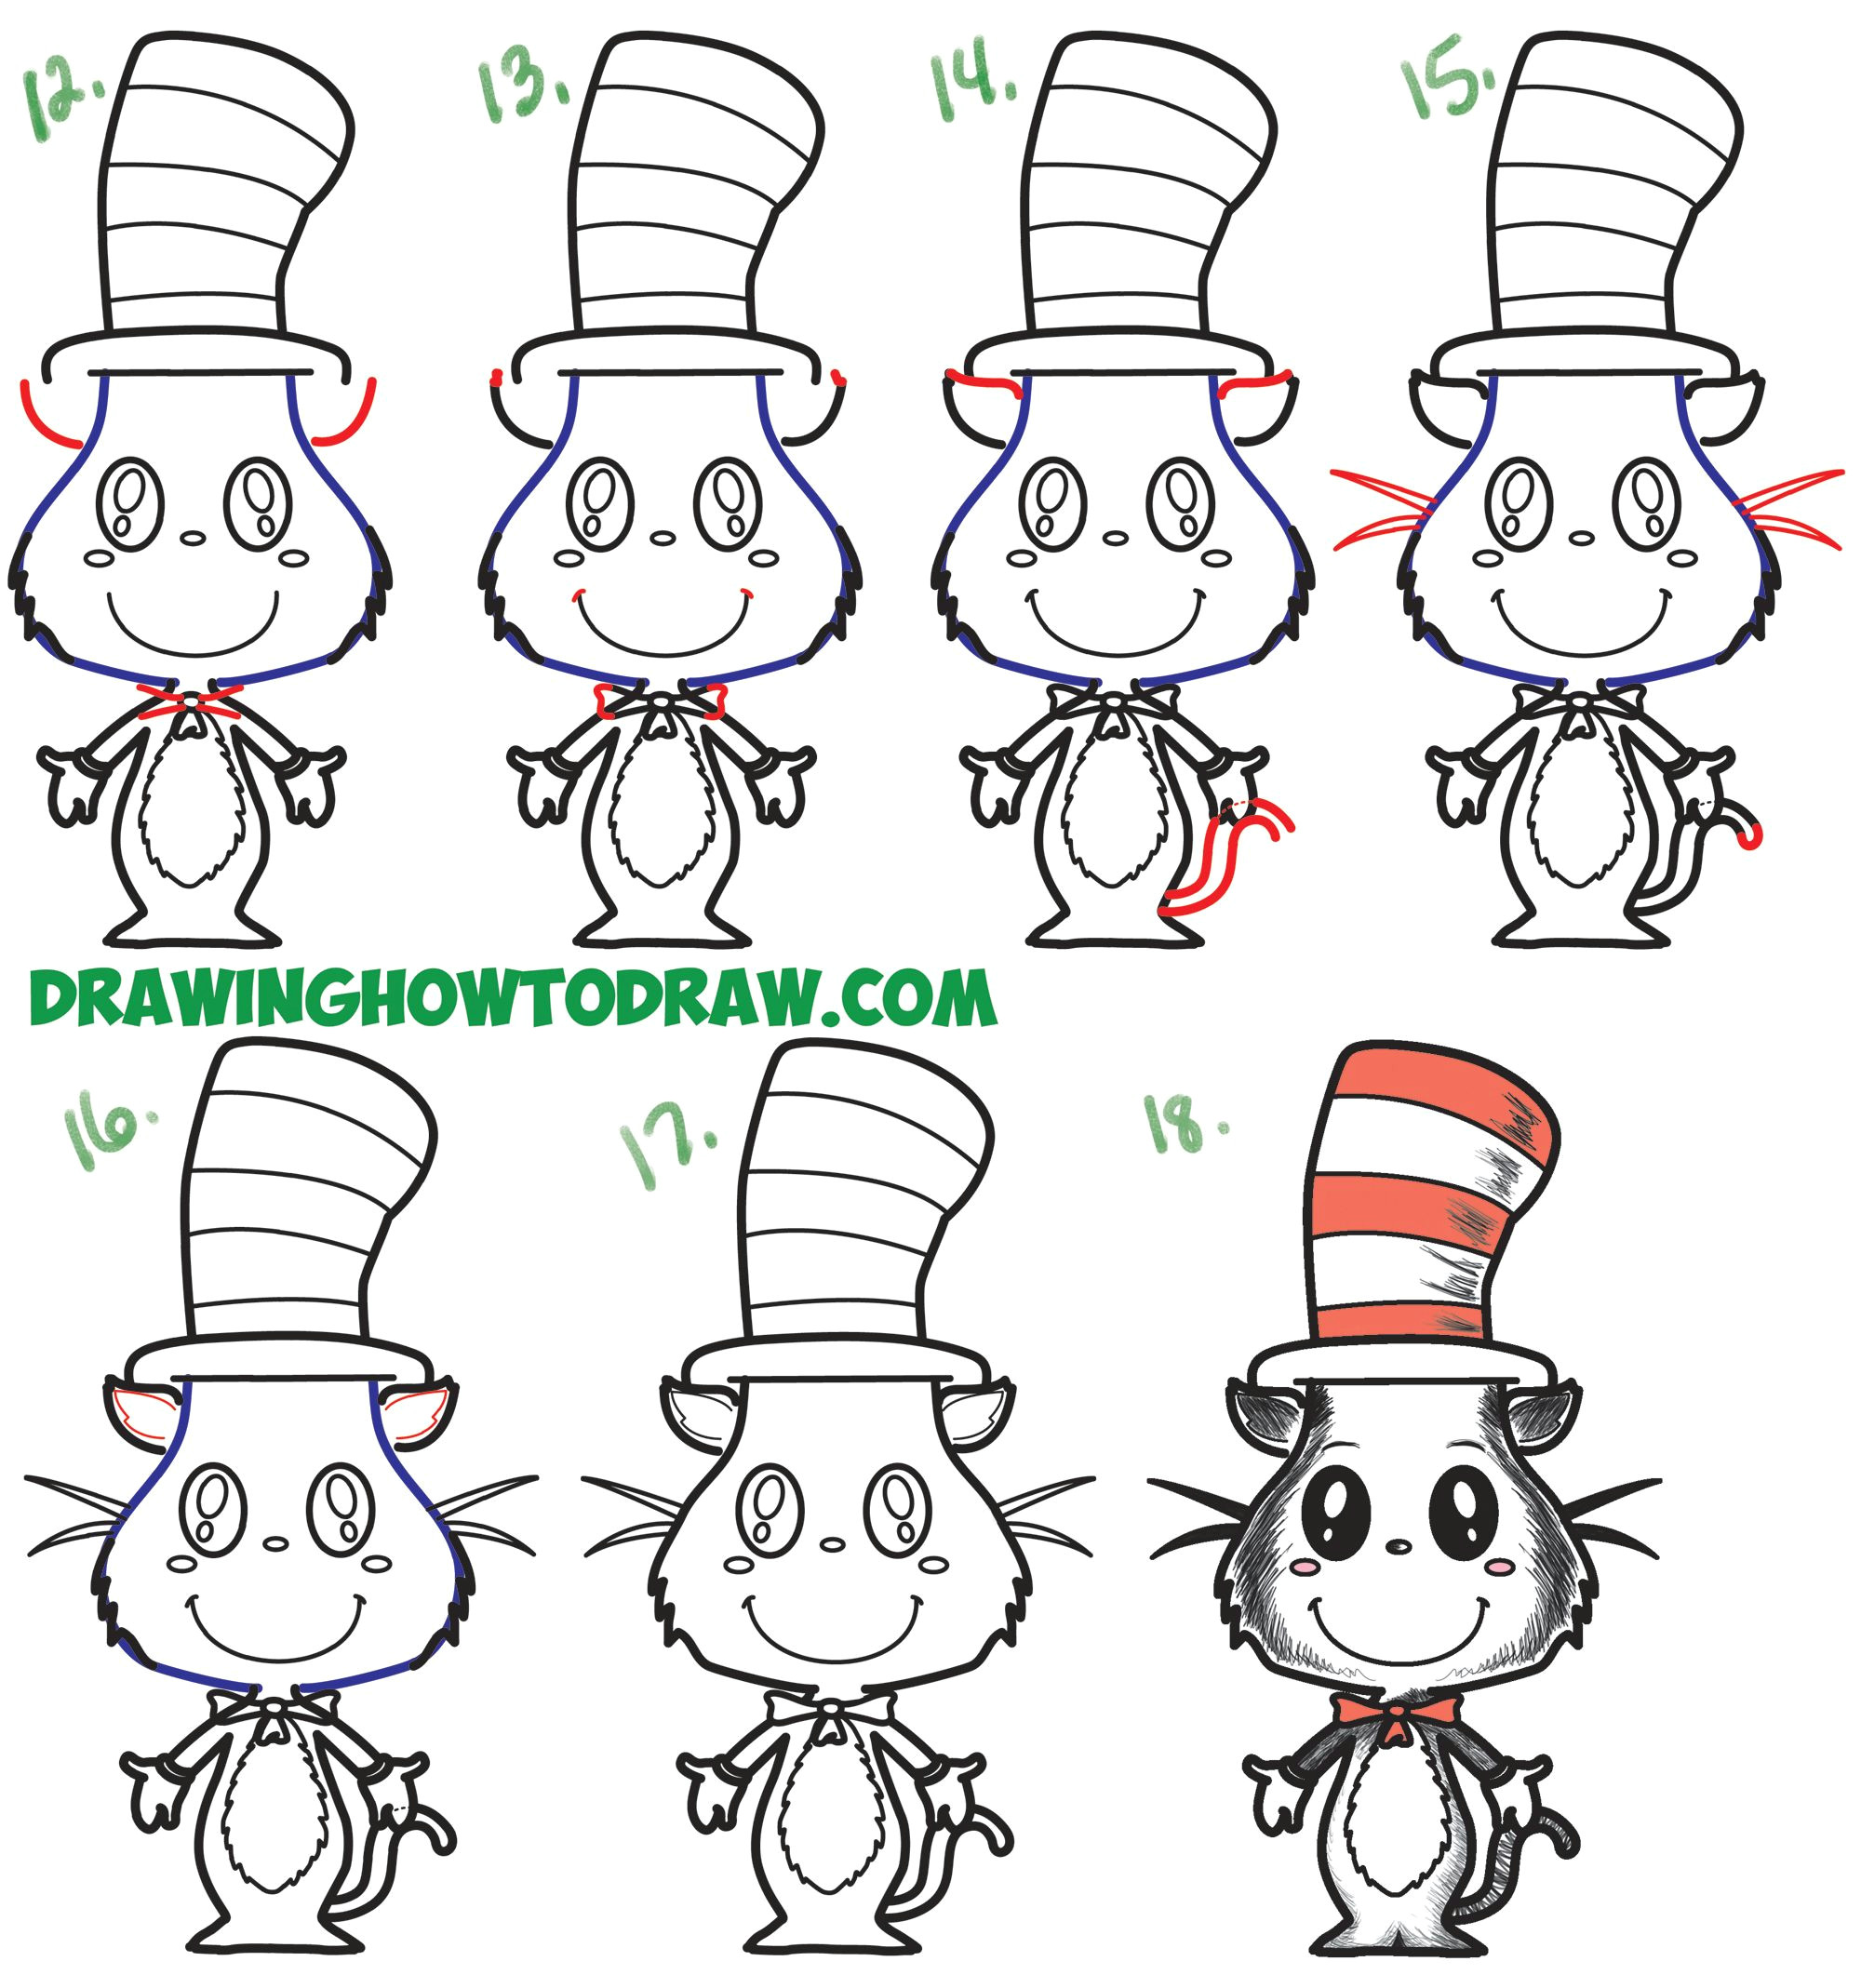 Black Panther Drawing Easy Step by Step How to Draw the Cat In the Hat Cute Kawaii Chibi Version